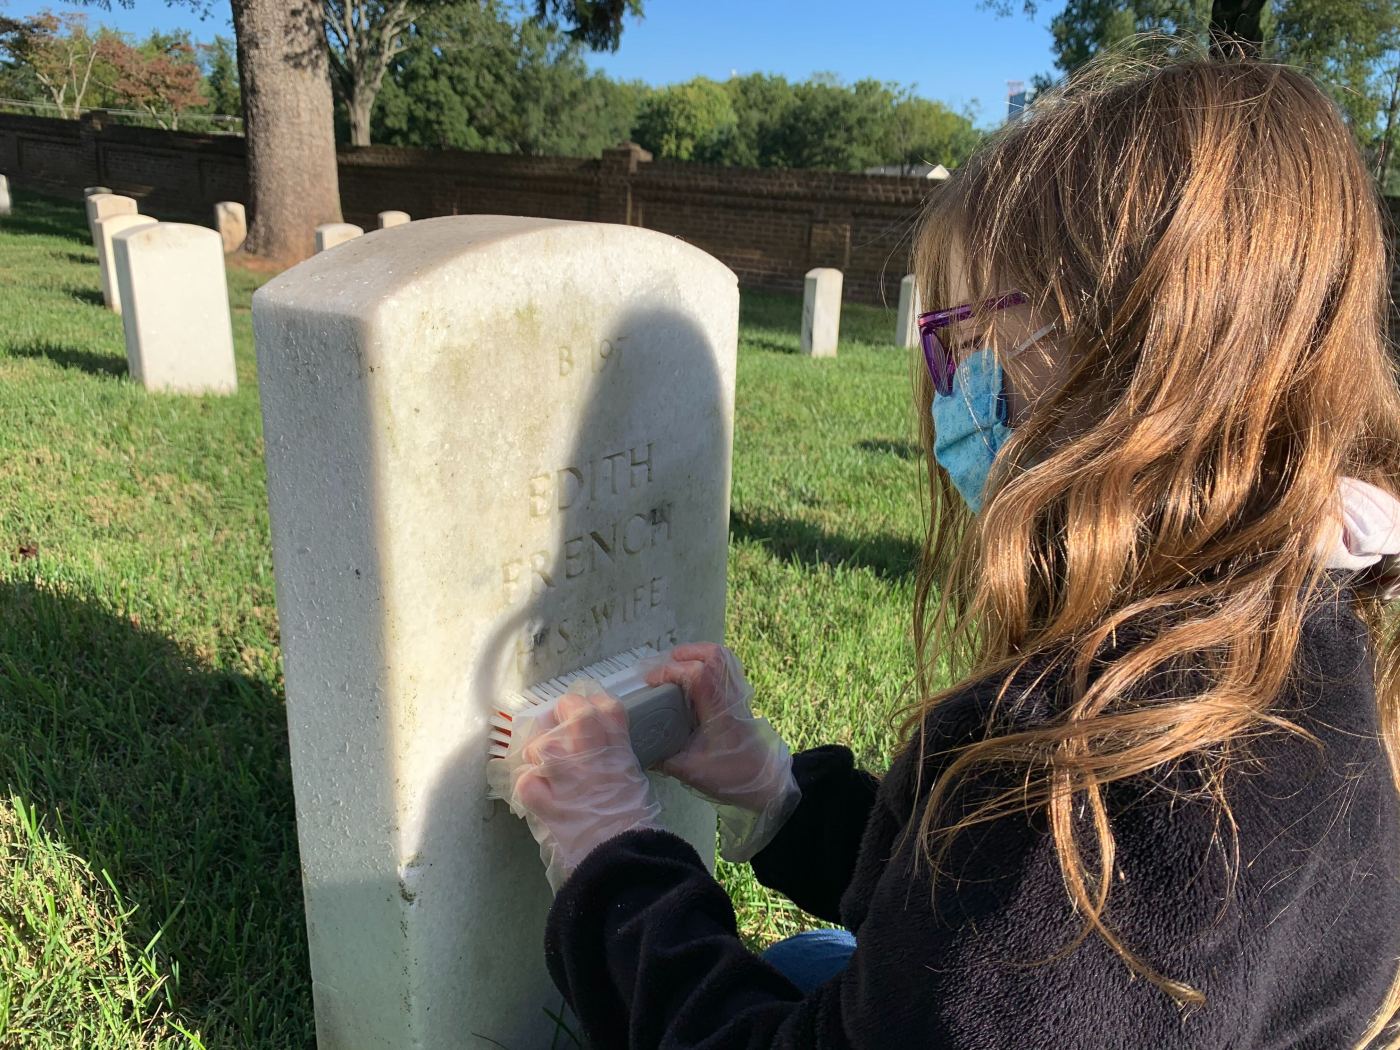 Volunteers can clean national cemeteries on National Day of Service